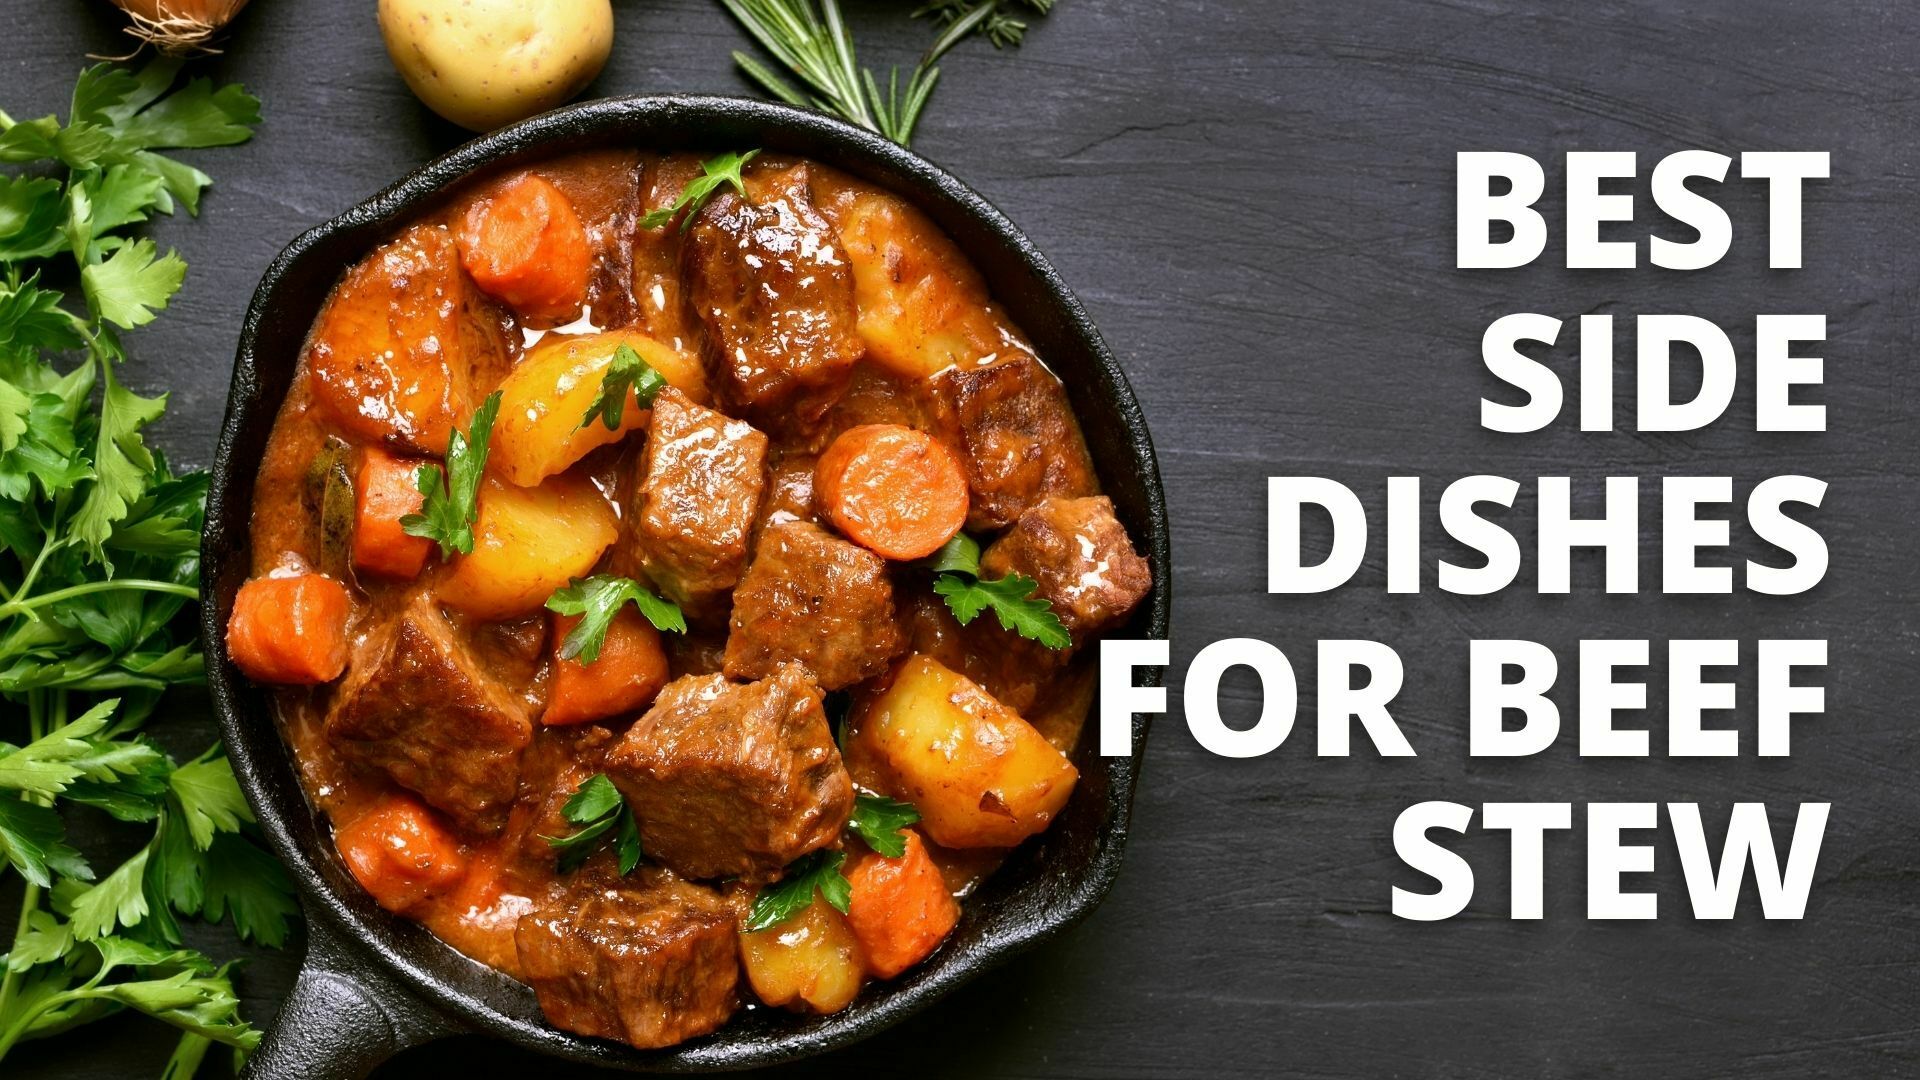 Best Side Dishes For Beef Stew